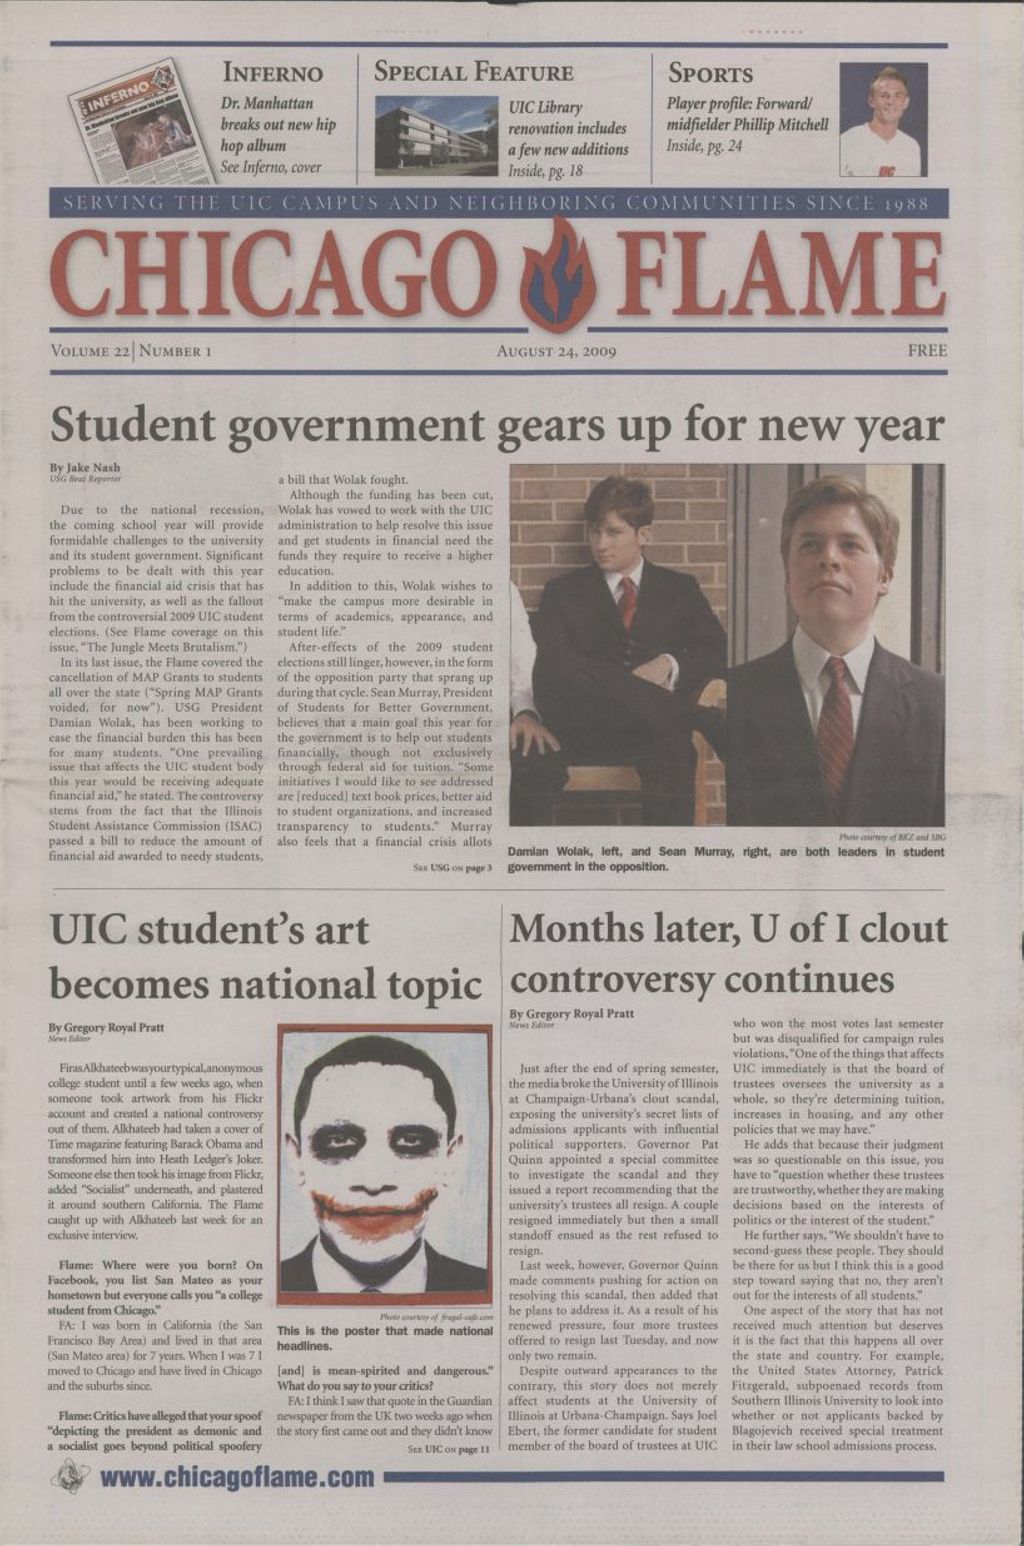 Miniature of Chicago Flame (August 24, 2009)